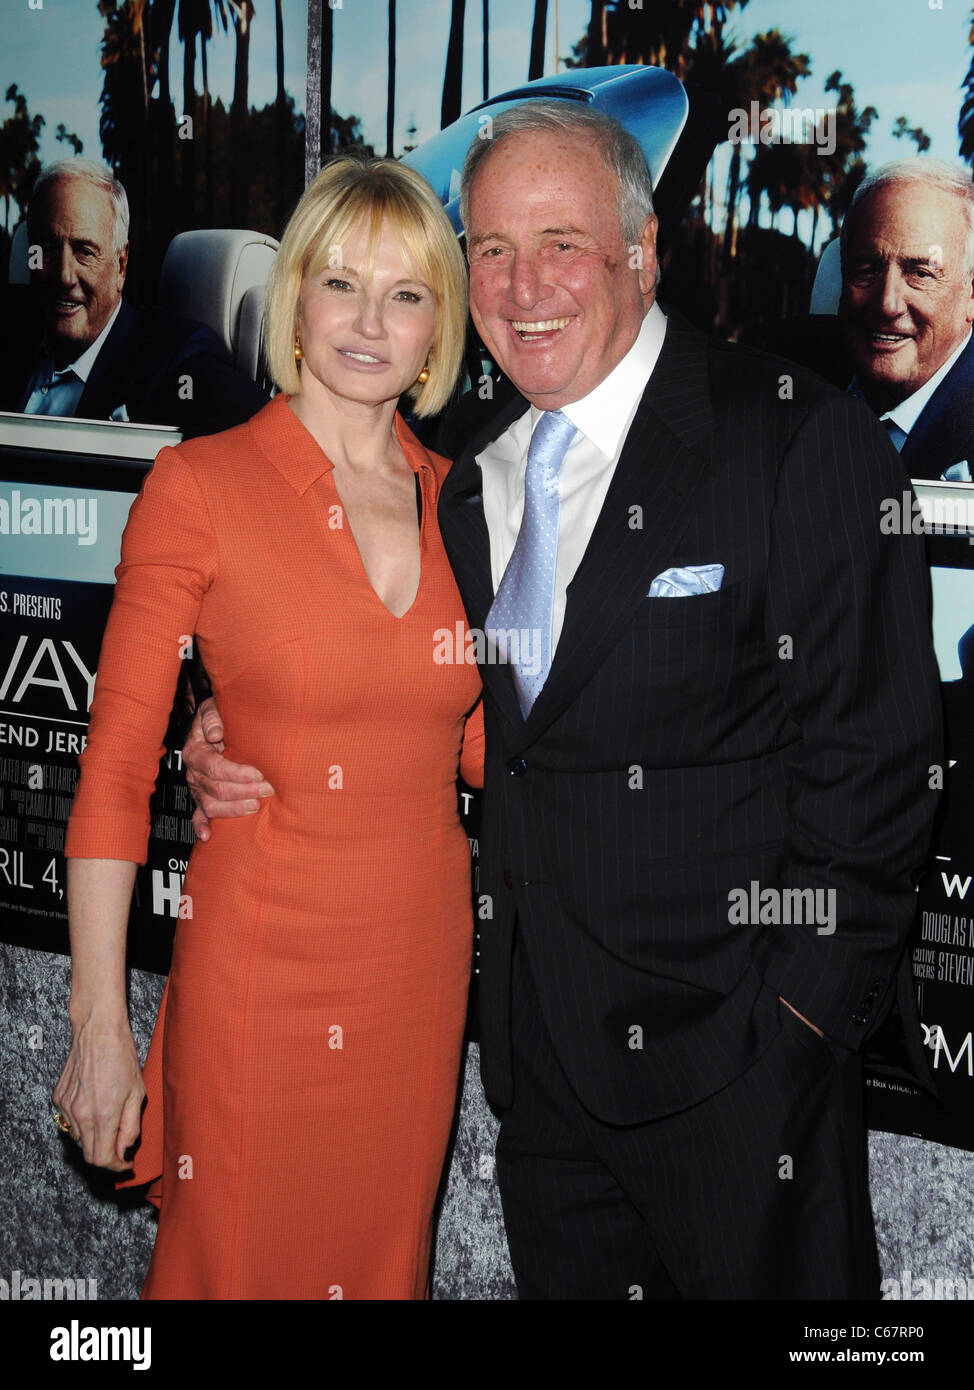 Ellen Barkin, Jerry Weintraub at arrivals for HIS WAY Premiere, The Paramount Theater, Los Angeles, CA March 22, 2011. Photo By: Dee Cercone/Everett Collection Stock Photo